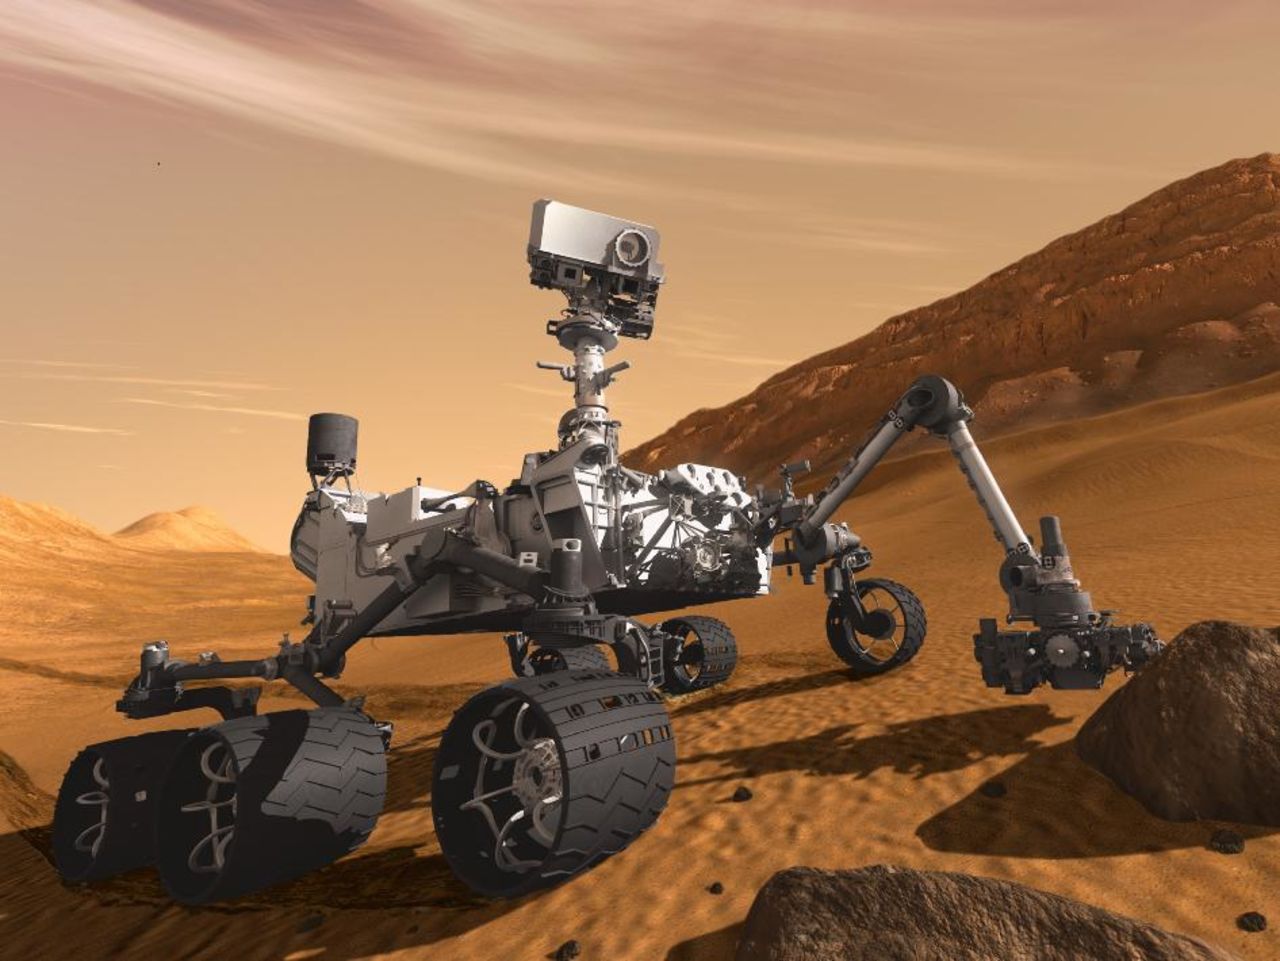 The Curiosity rover did it: We now know<a href="http://lightyears.blogs.cnn.com/2013/03/12/nasa-yes-mars-could-have-hosted-life" target="_blank"> life could have existed on Mars</a>. Meanwhile, a company called Mars One announced plans to send people there, and <a href="http://edition.cnn.com/2013/12/10/tech/innovation/mars-one-plan/index.html" target="_blank">200,000 people signed up to be prospective astronauts</a>. 